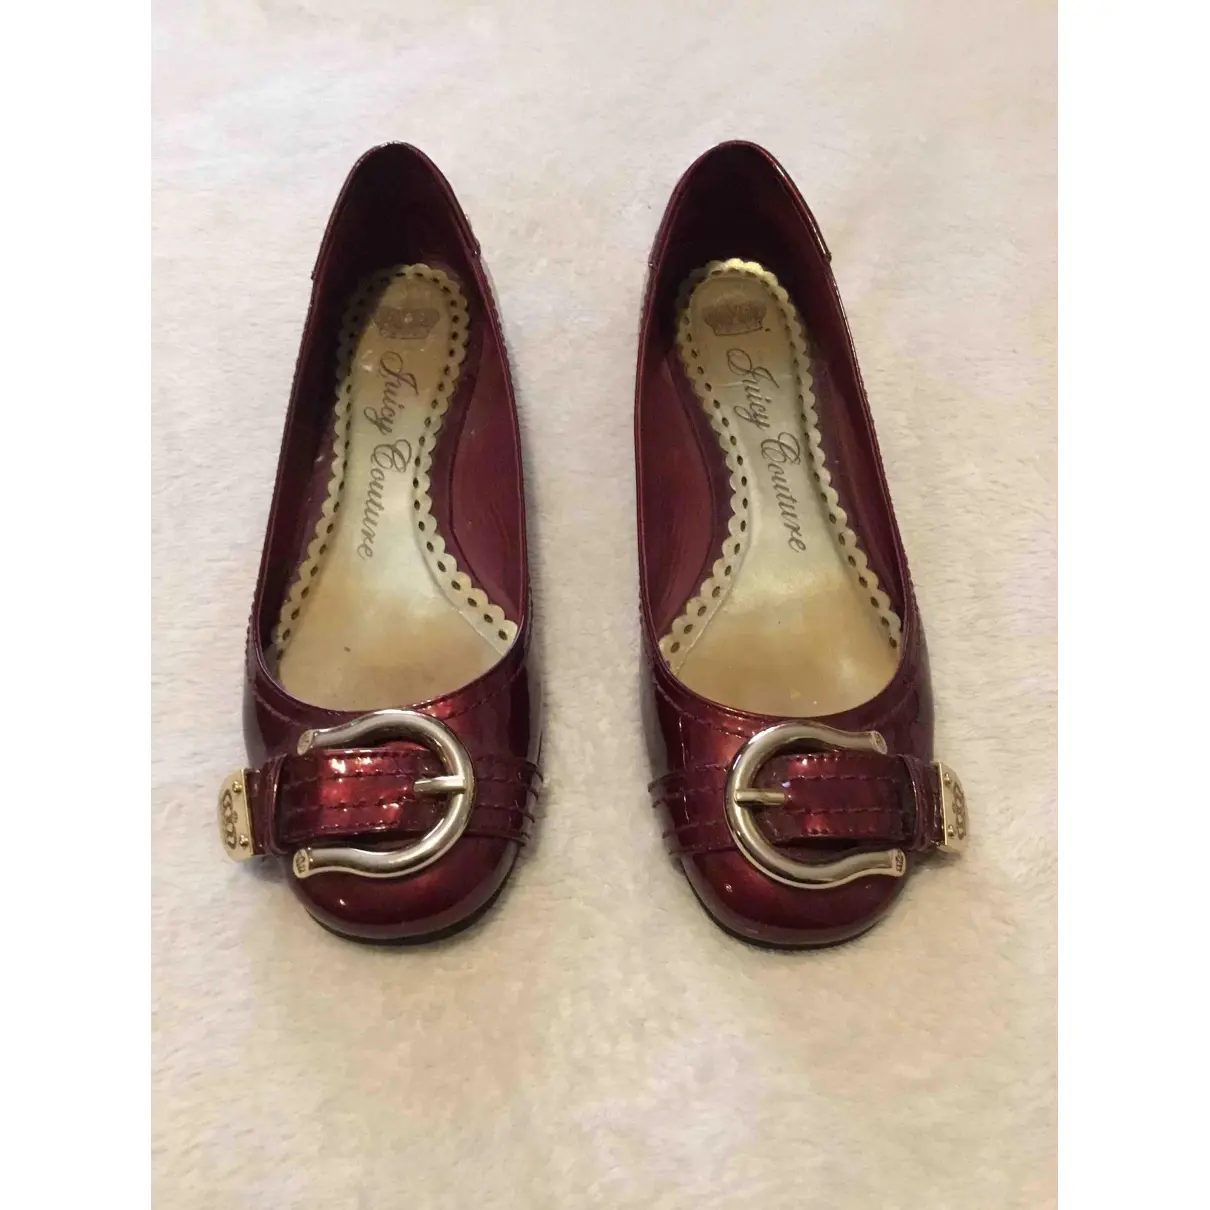 Juicy Couture Patent leather ballet flats for sale